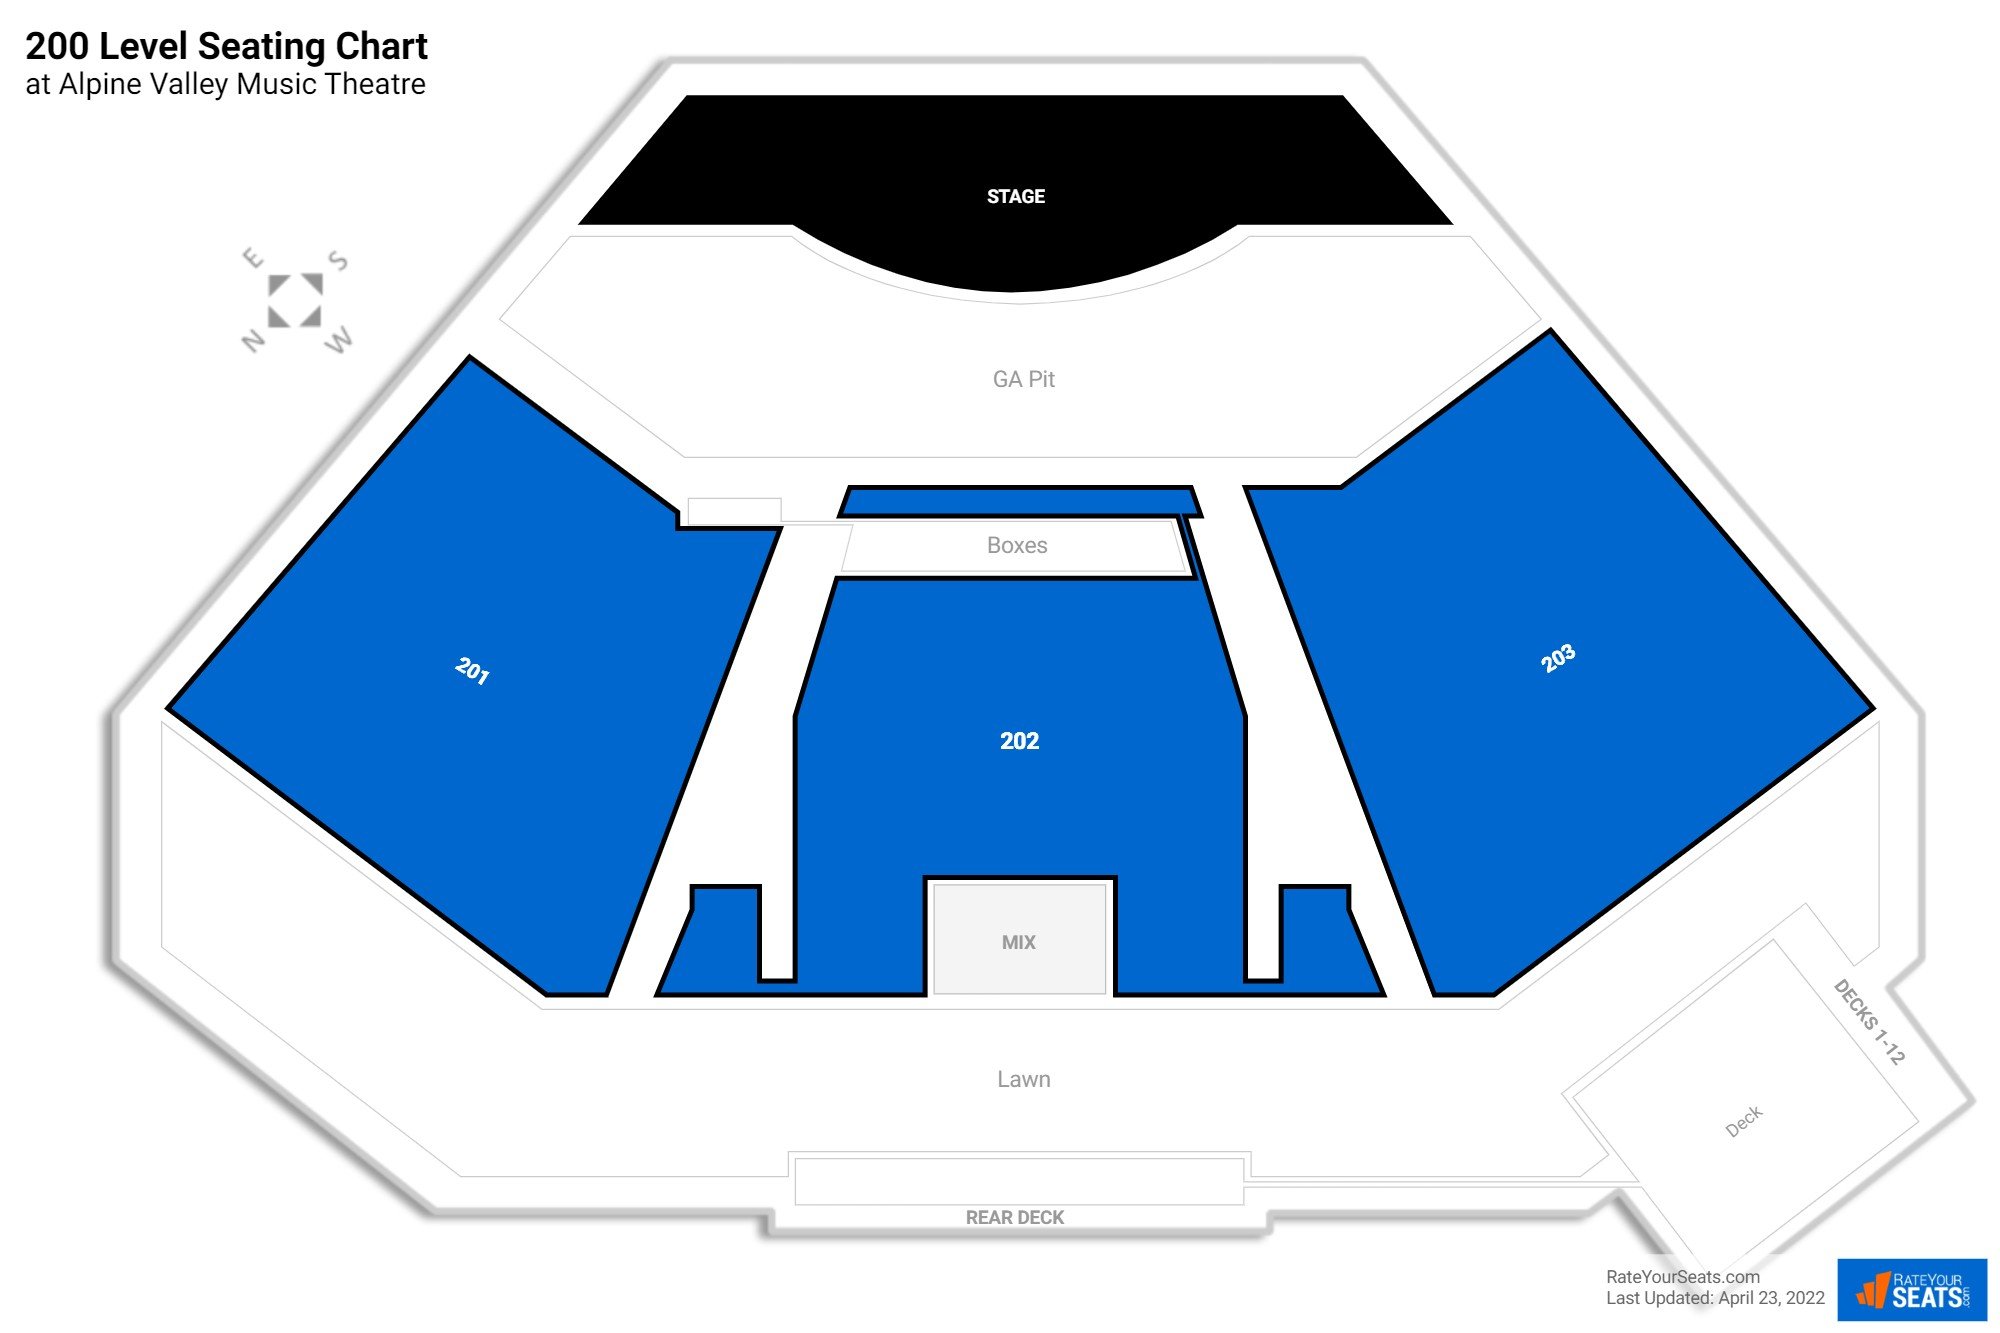 Concert 200 Level Seating Chart at Alpine Valley Music Theatre